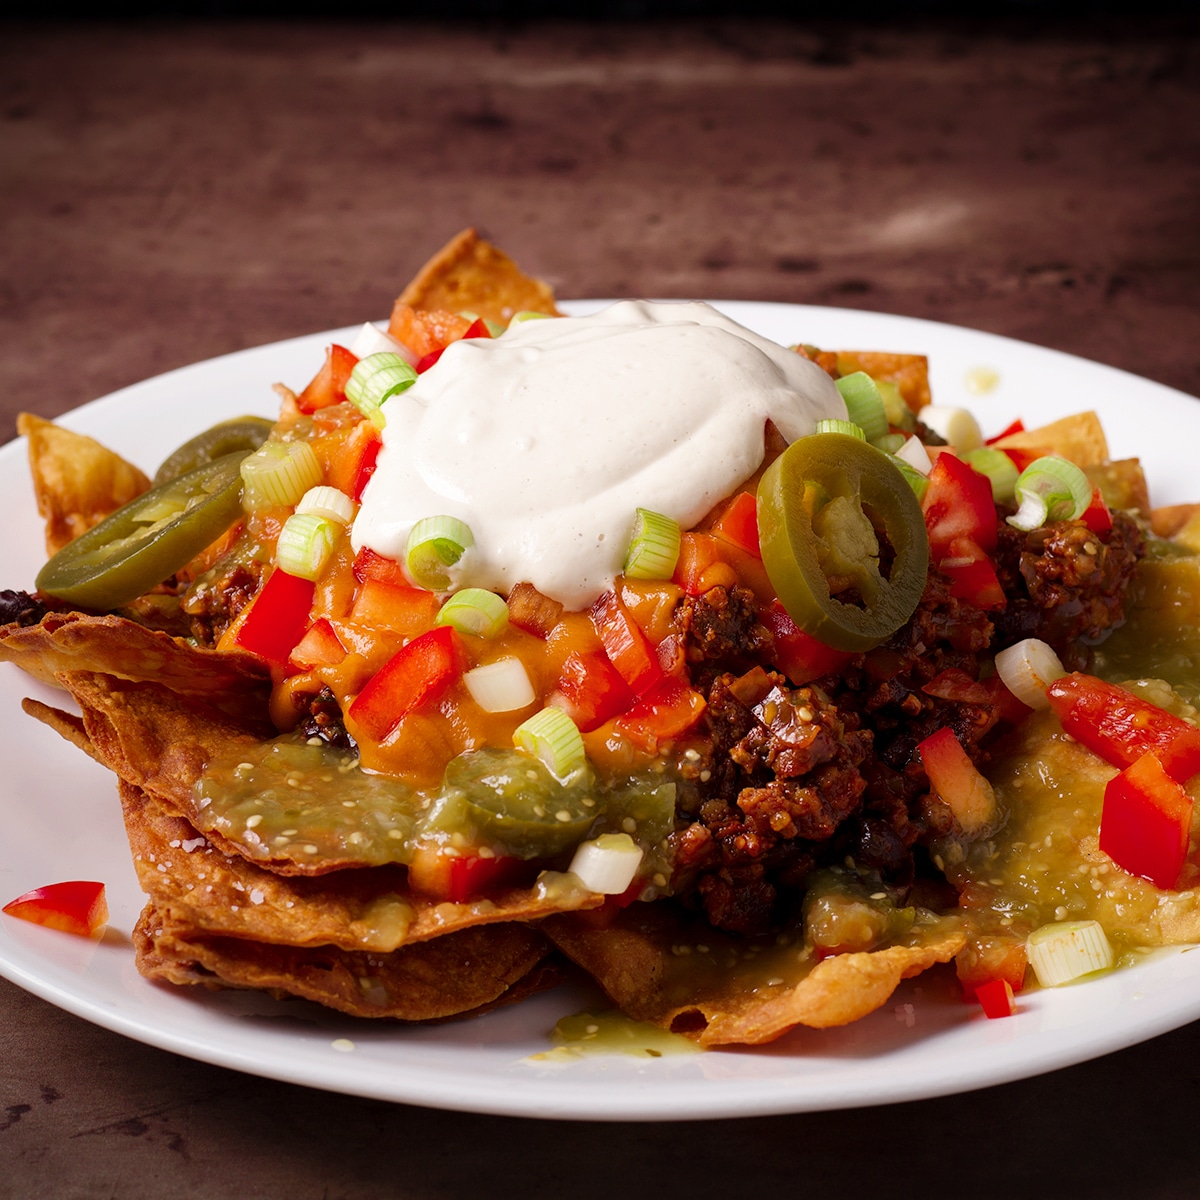 A plate of vegan nachos made from homemade tortilla chips, vegan taco meat, vegan sour cream, vegan cheese sauce, and chopped vegetables.